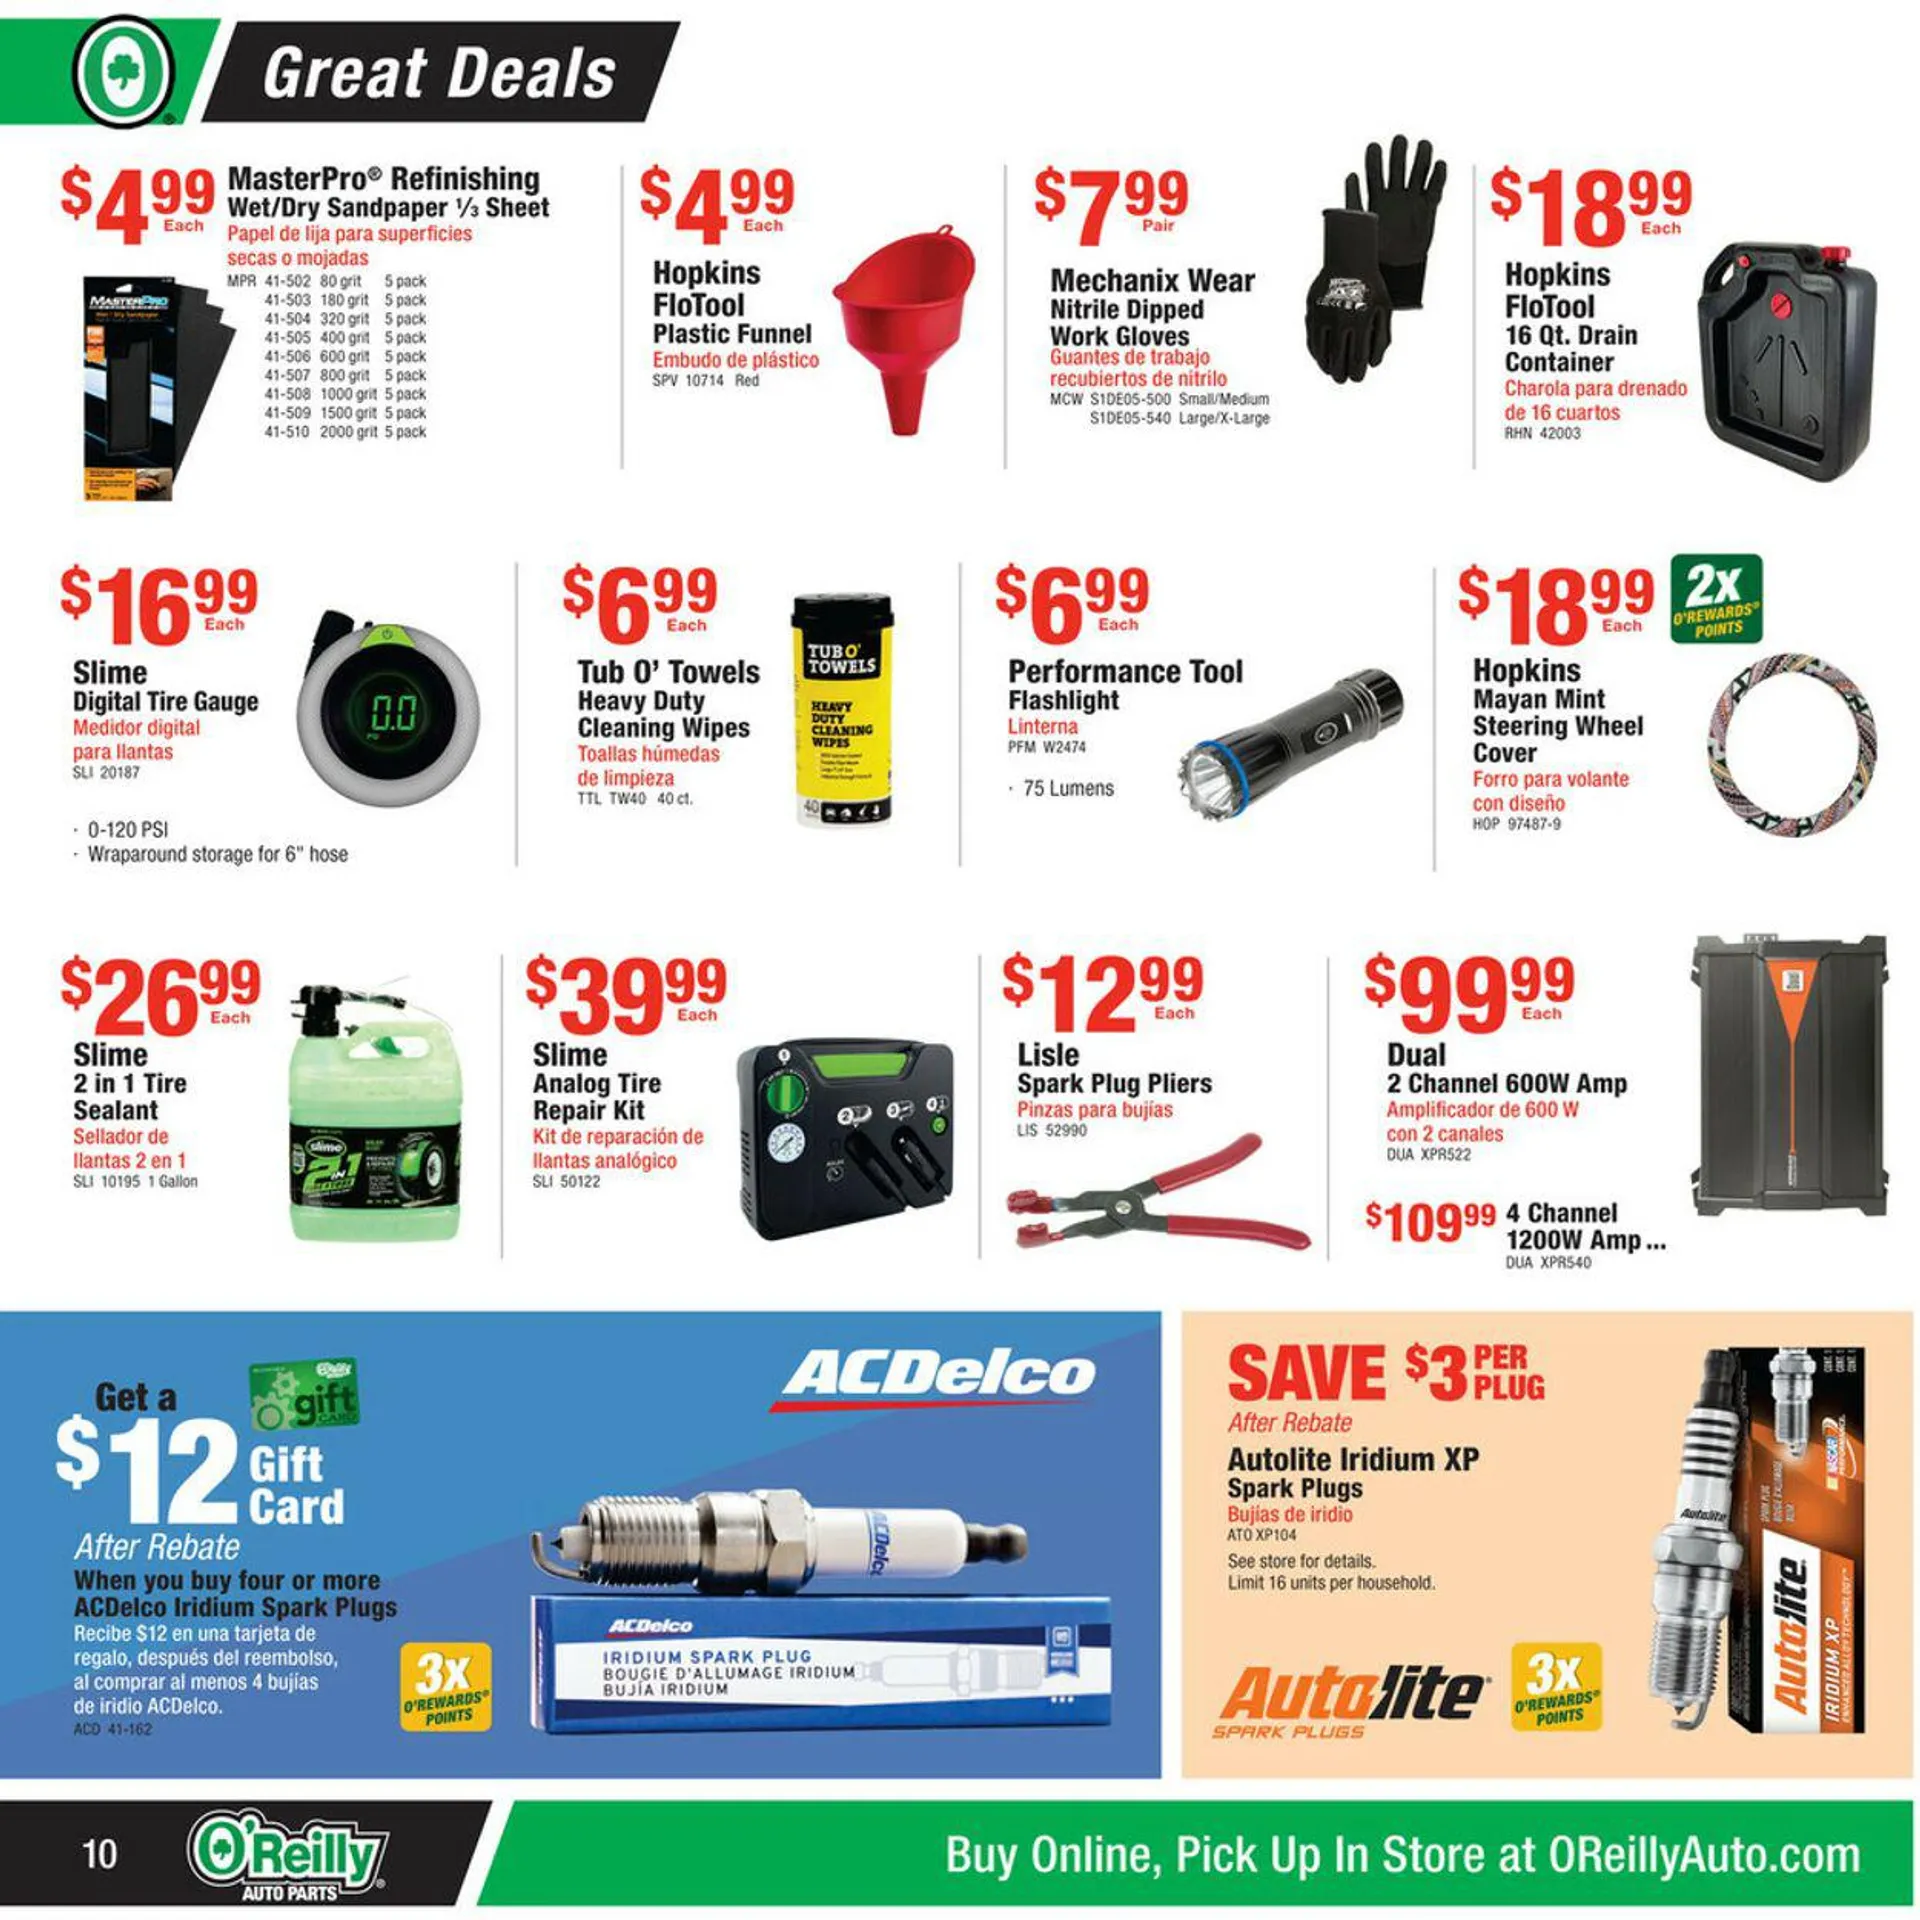 OReilly Auto Parts Current weekly ad - 10